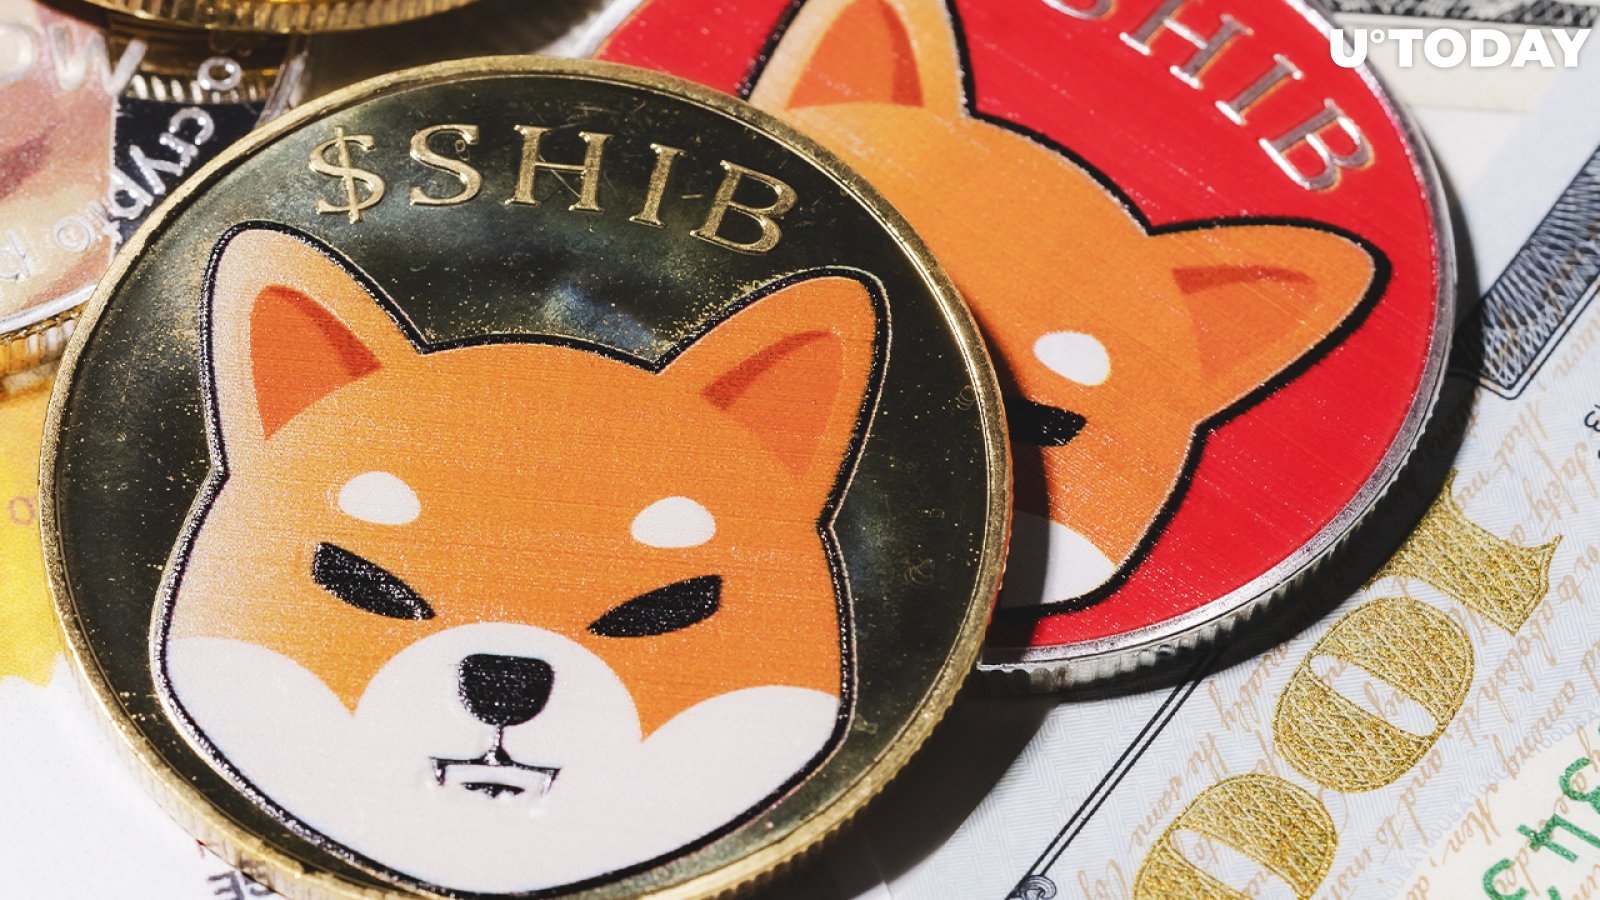 383.5 Million SHIB Burned in Past 3 Days, While Coin Is in Decline